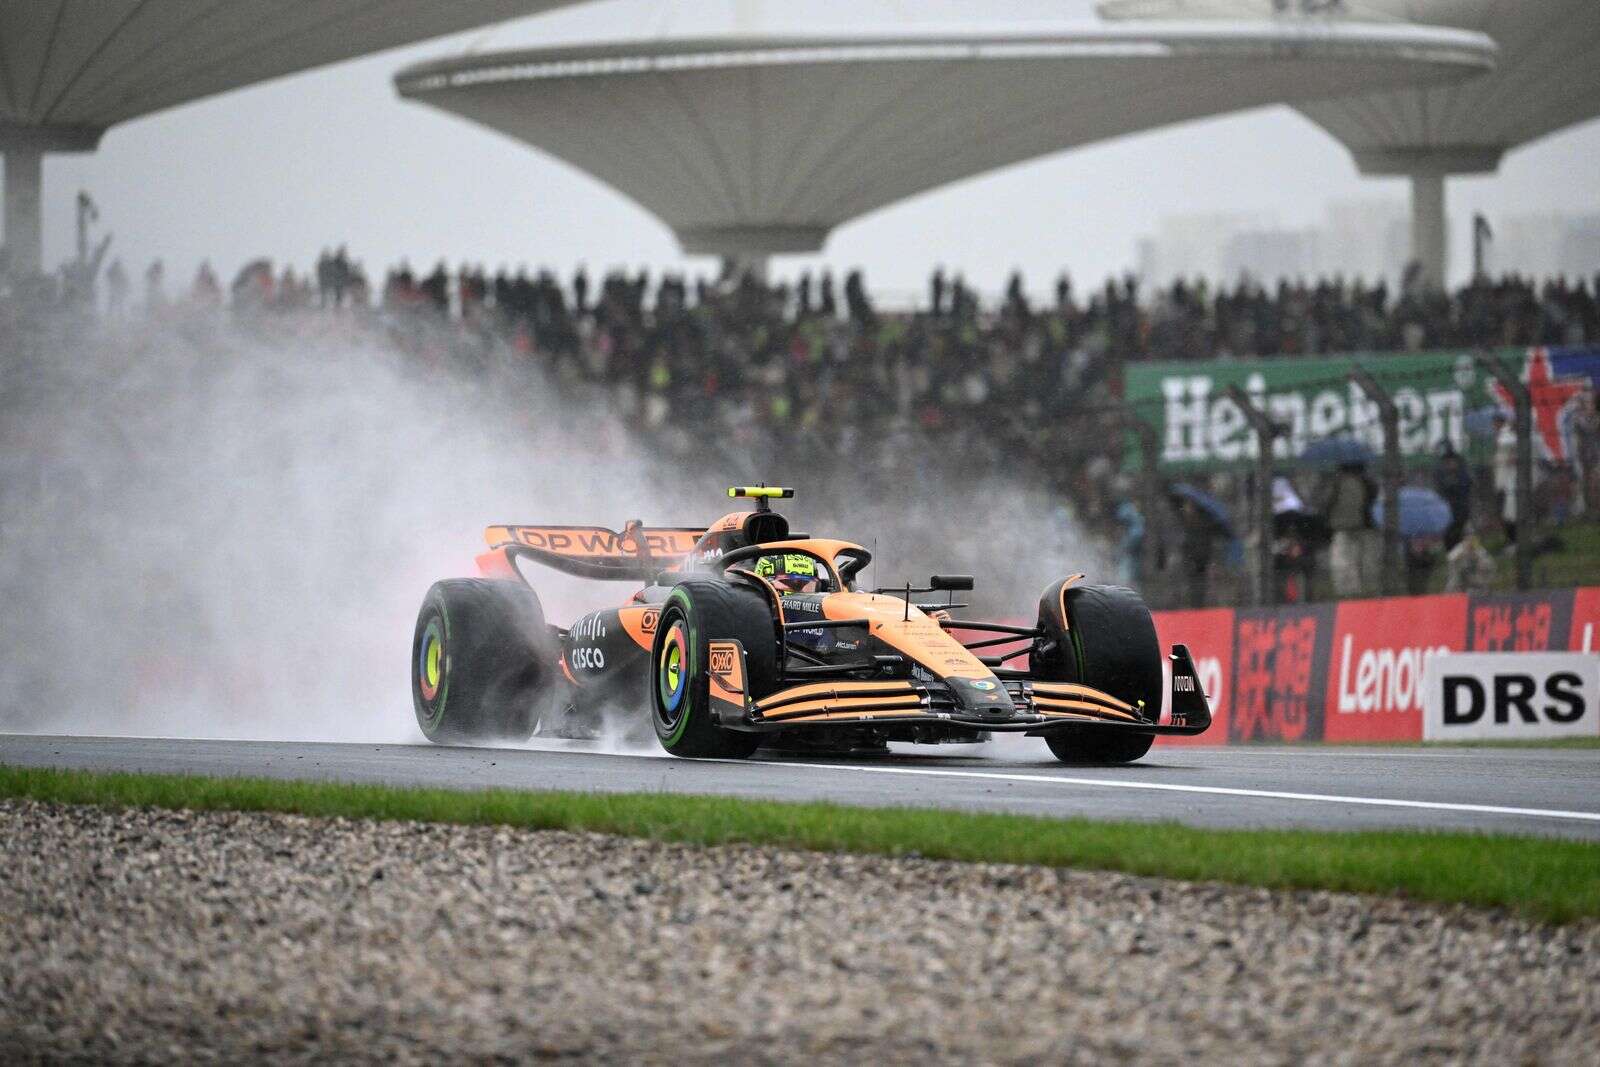 formula one: 'all-or-nothing' norris takes sprint pole in rain chaos at chinese gp